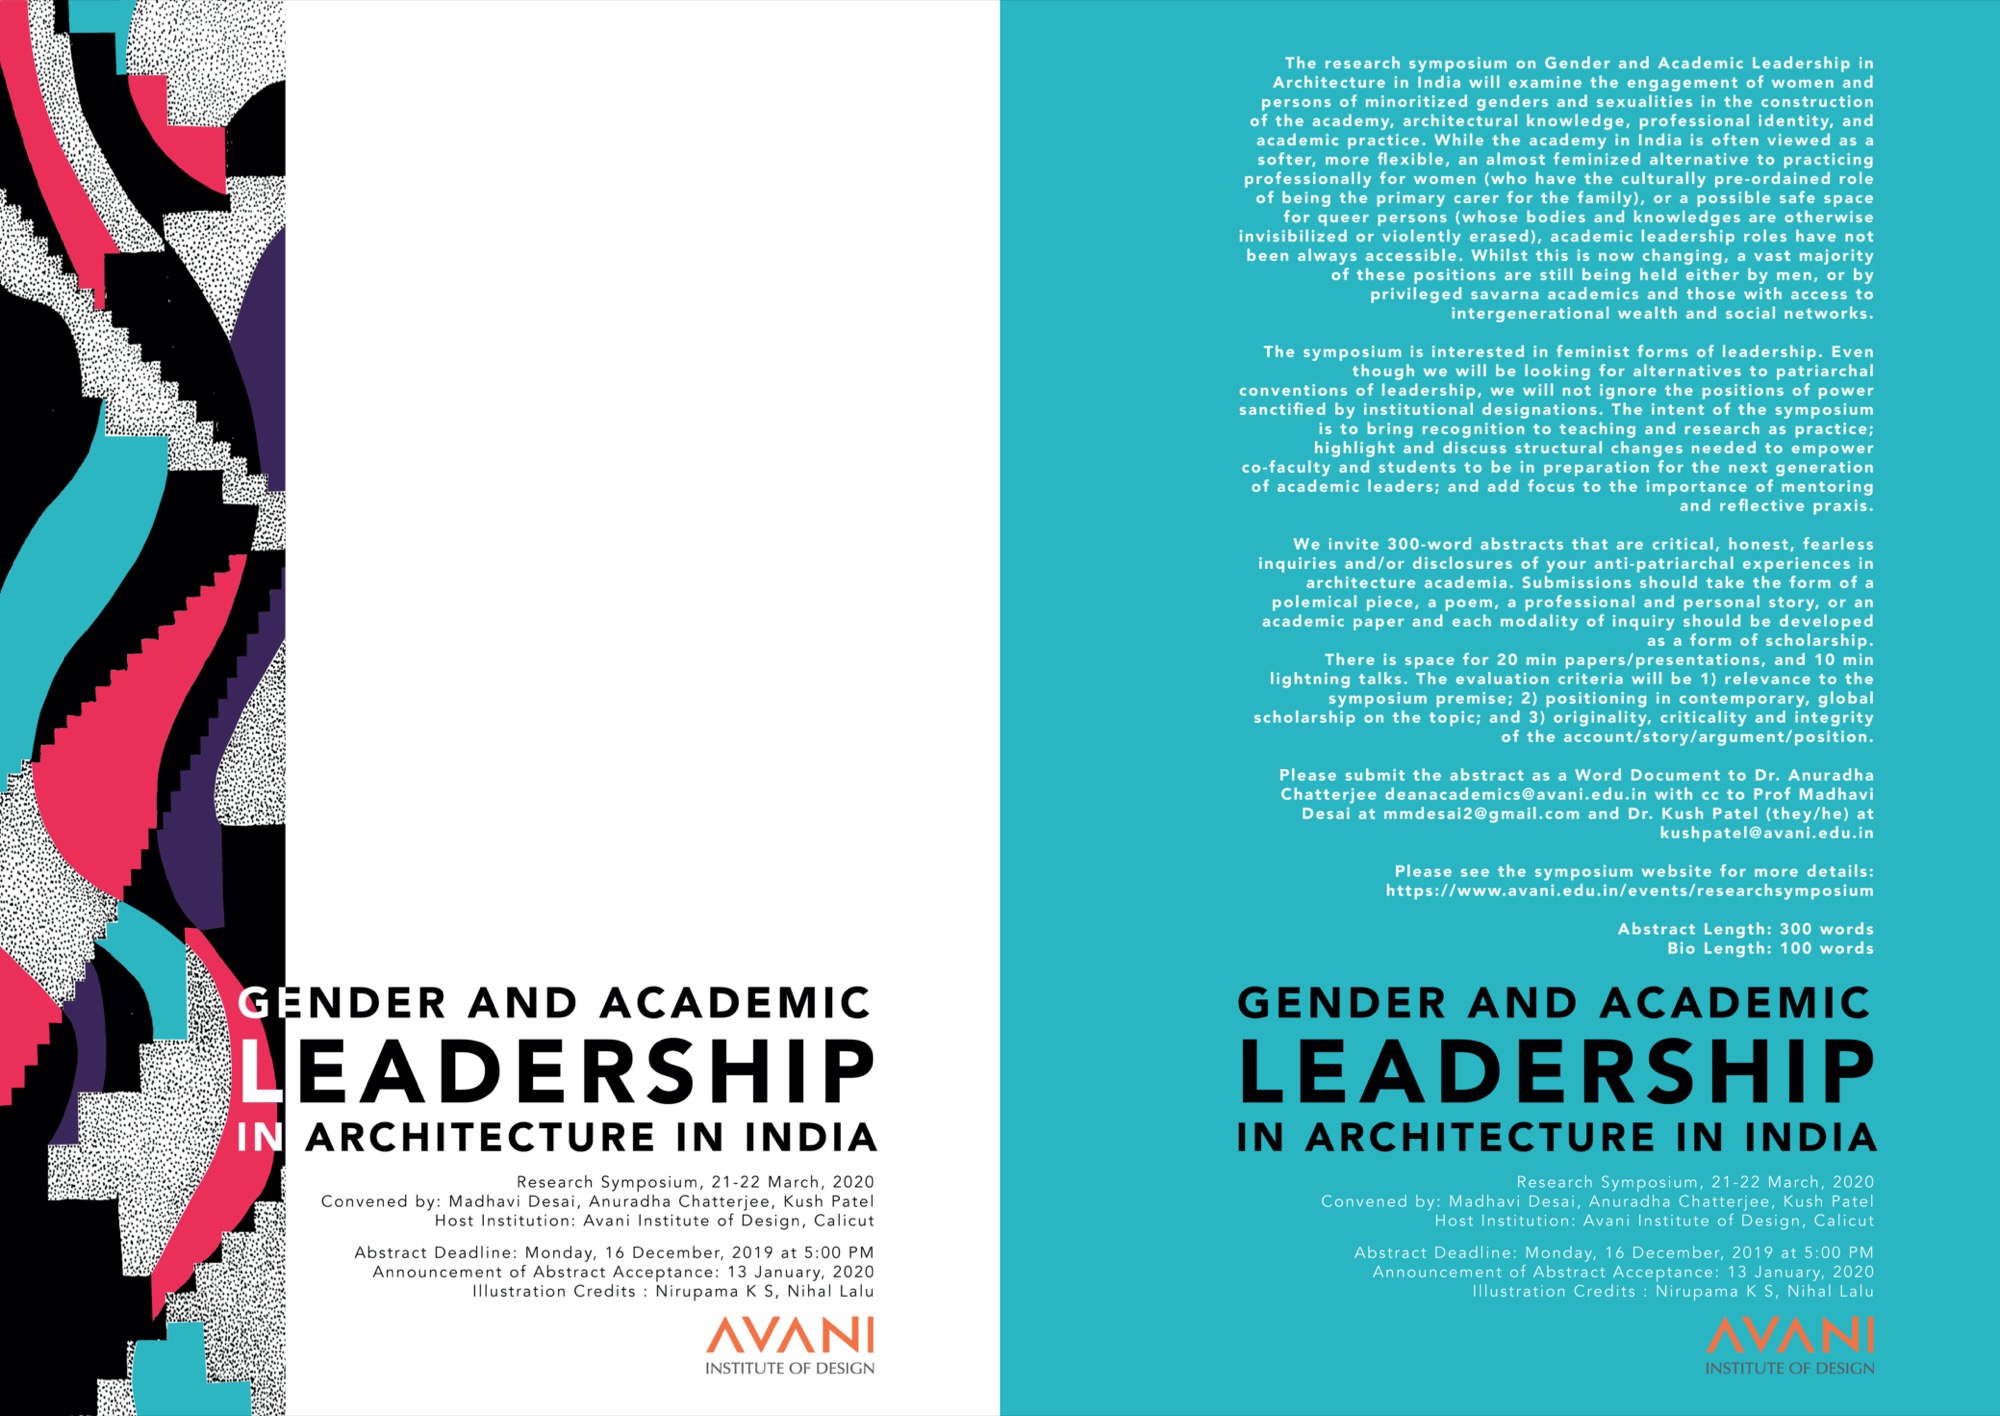 Call for Papers: Gender and Academic Leadership - Architecture in India